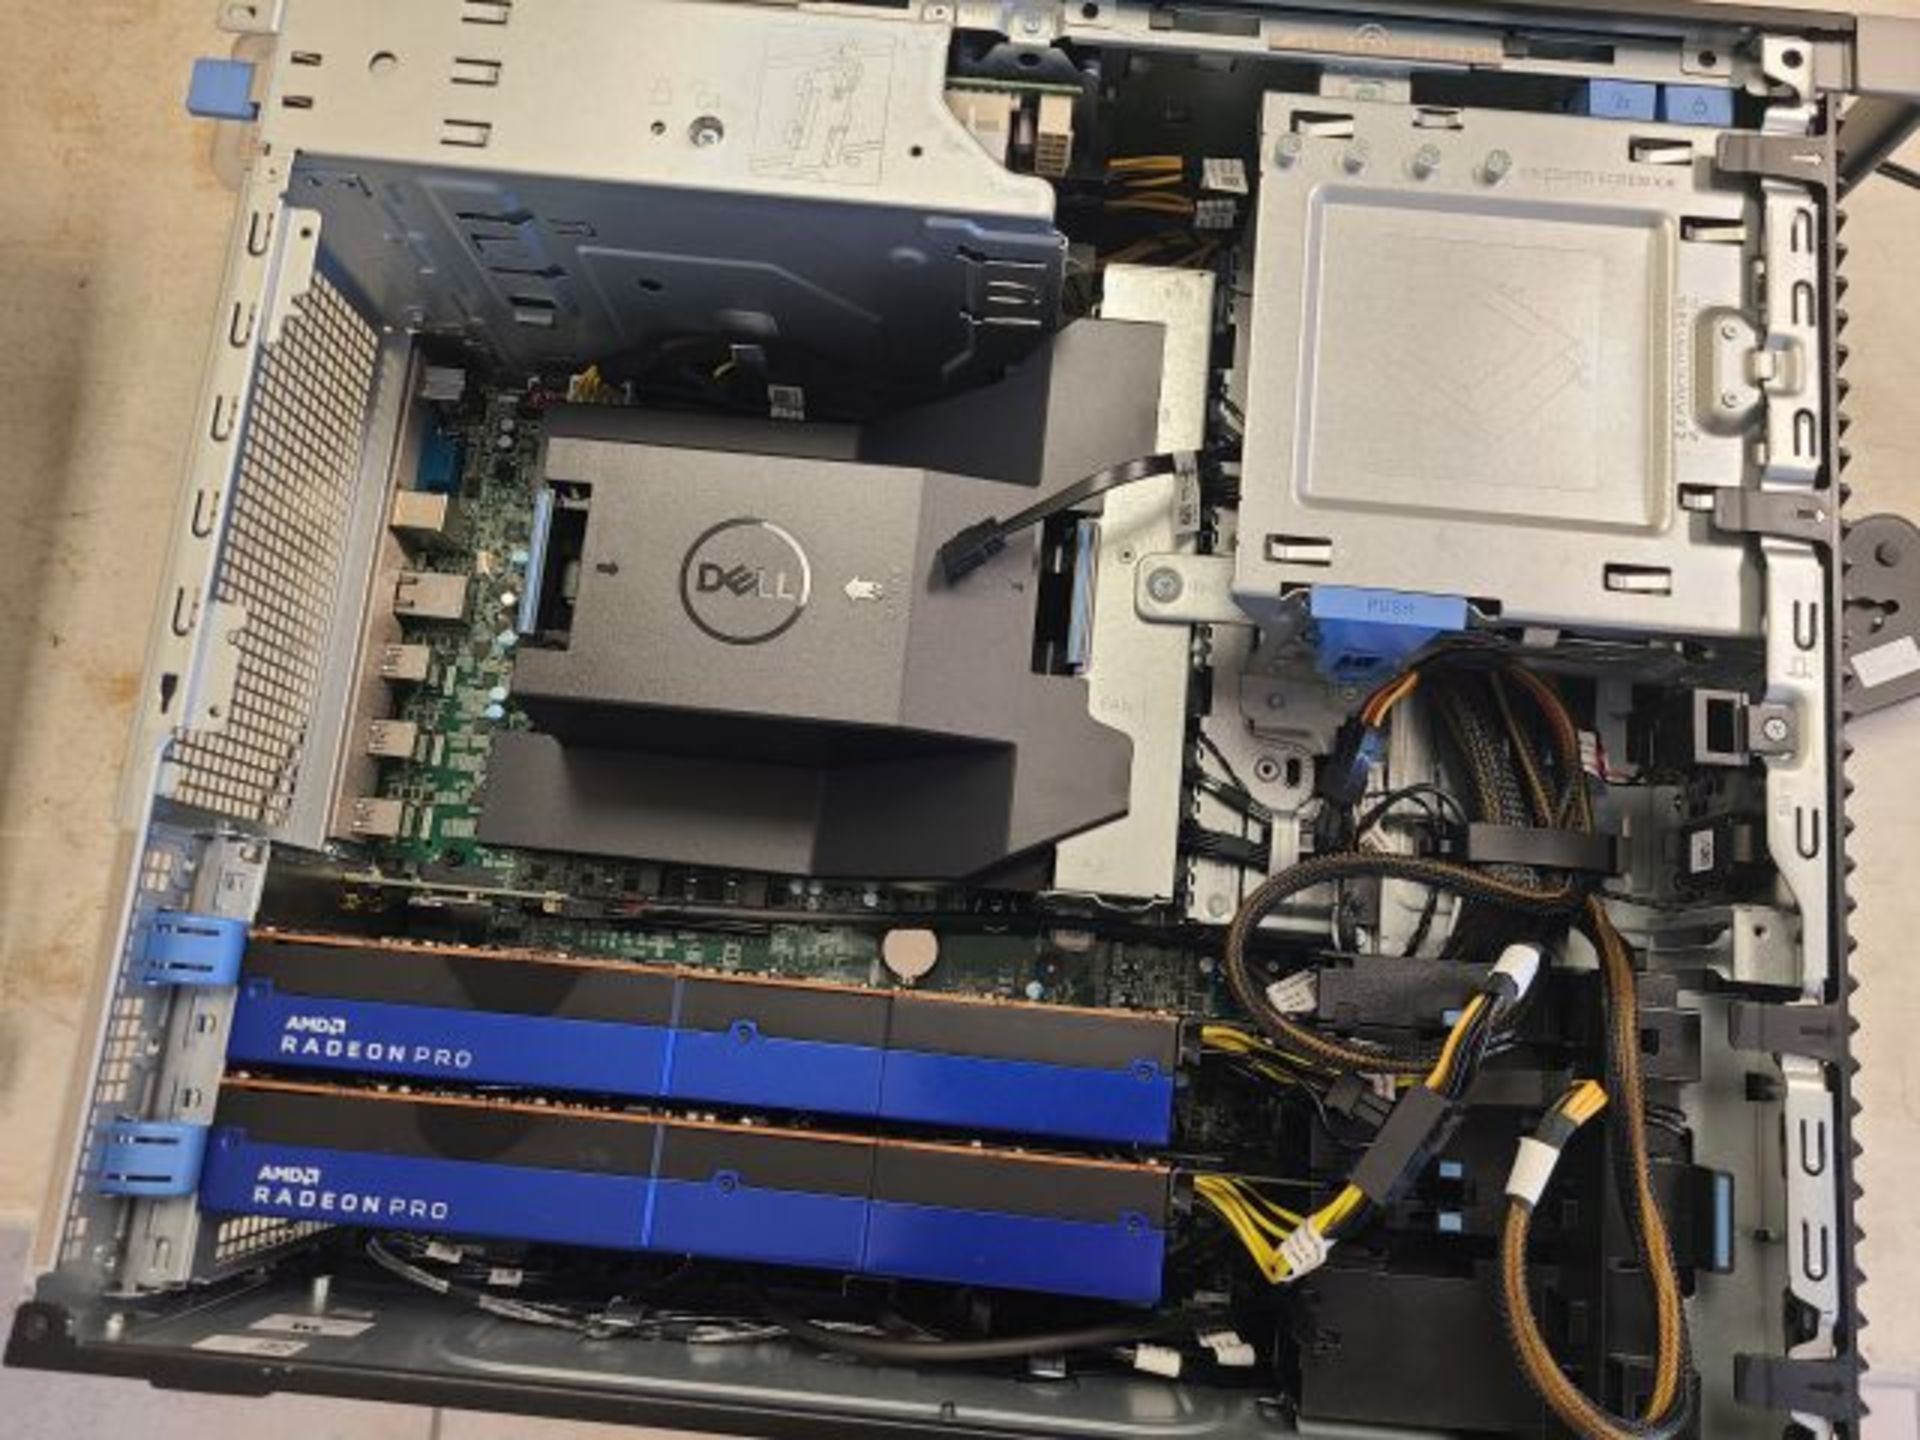 2021 Dell Precision 5820 computer with dual AMD Radeon Pro W5700 graphics cards - Image 2 of 2